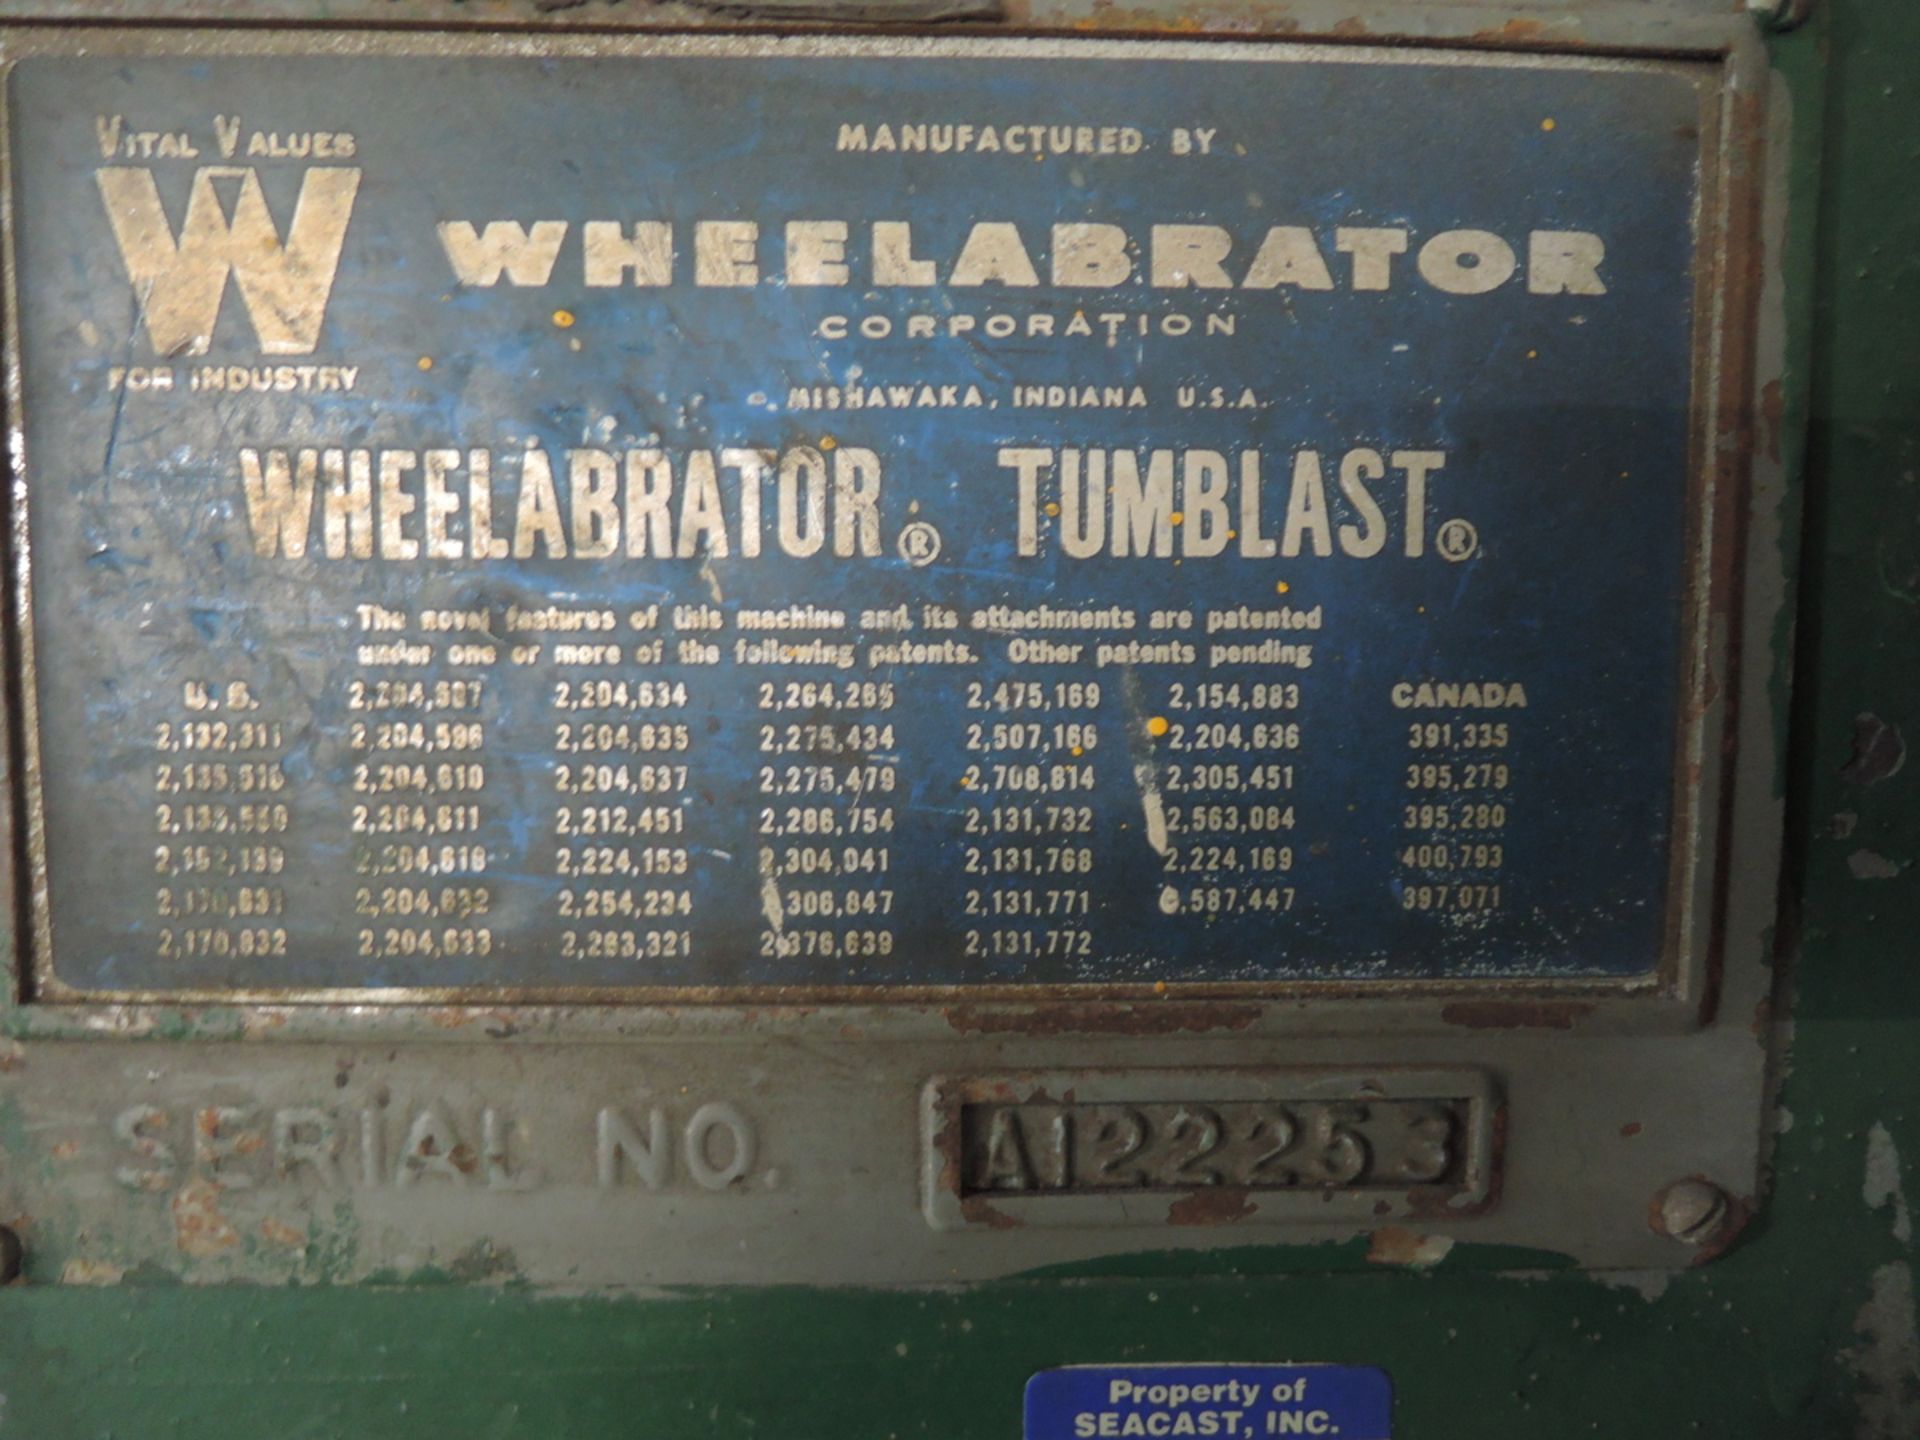 WHEELABRATOR 20 X 27 RUBBER BELT BLAST MACHINE S/N A122253, 5HP, 230/460 VOLTS WITH SEPERATOR AND - Image 5 of 9